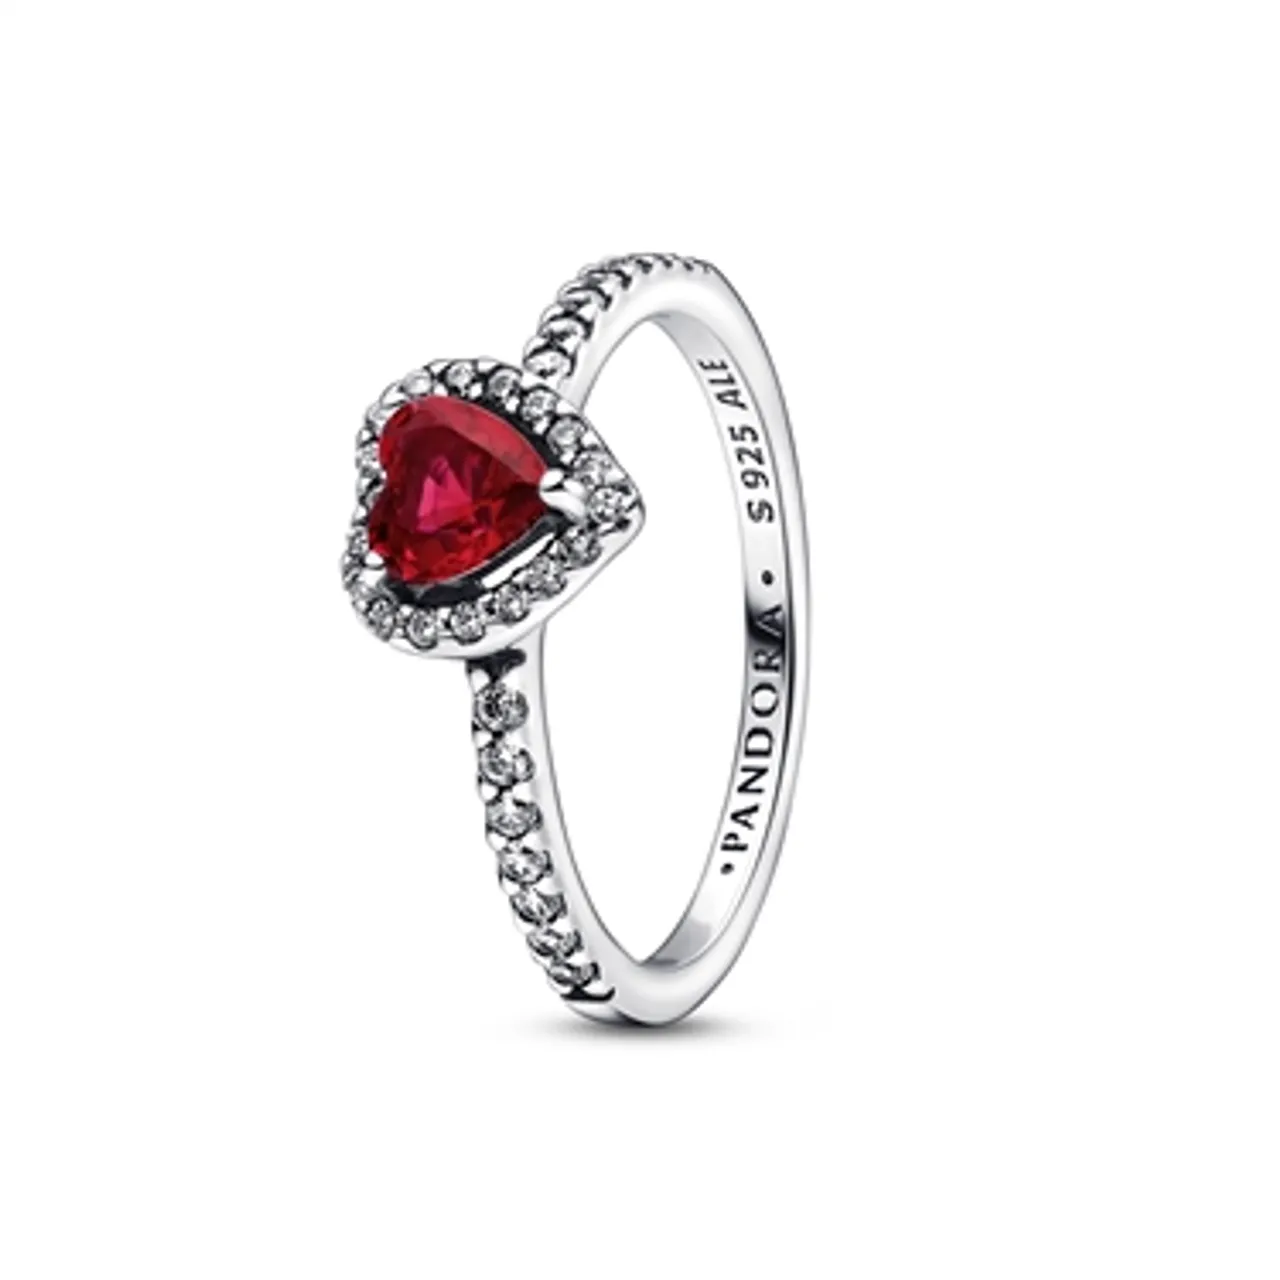 Pandora Sparkling Red Elevated Heart Ring - 60